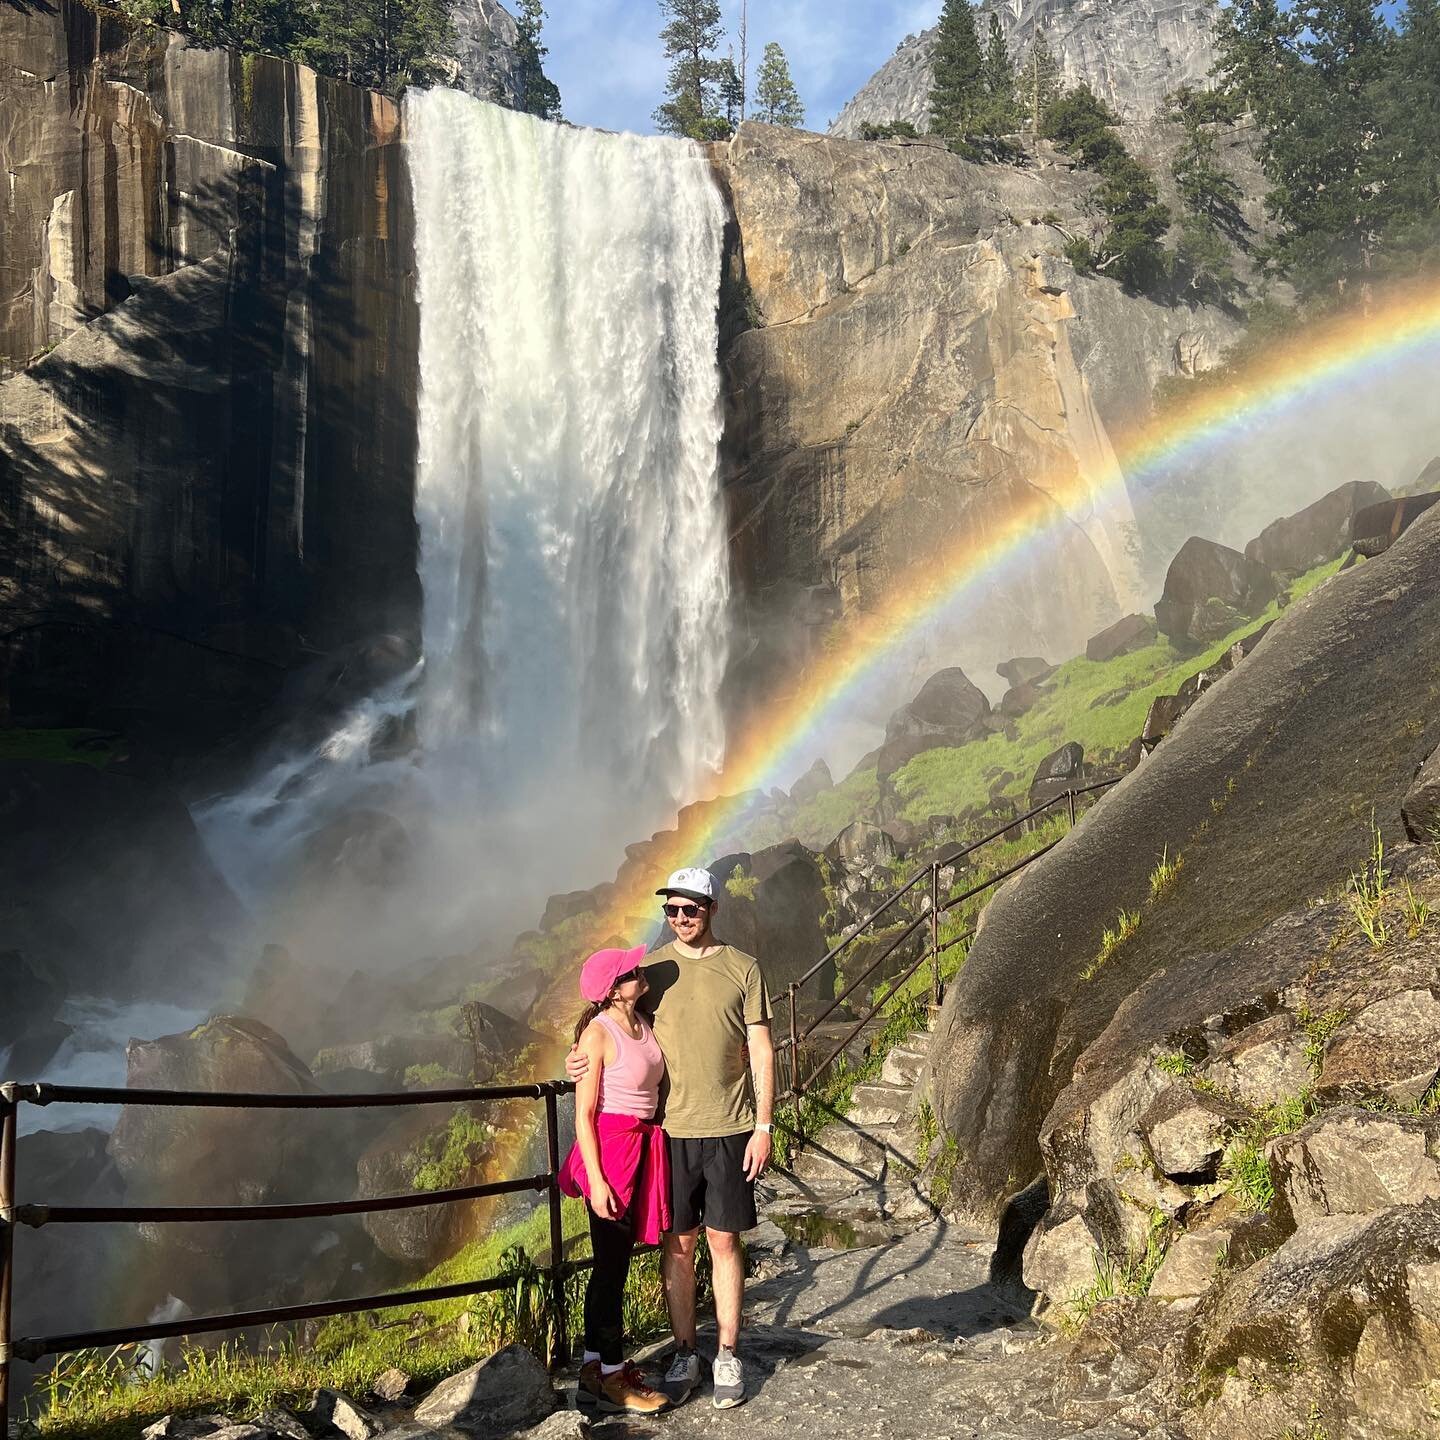 This waterfall/rainbow moment deserved a spot on the feed 🩵Yosemite with friends was 10/10